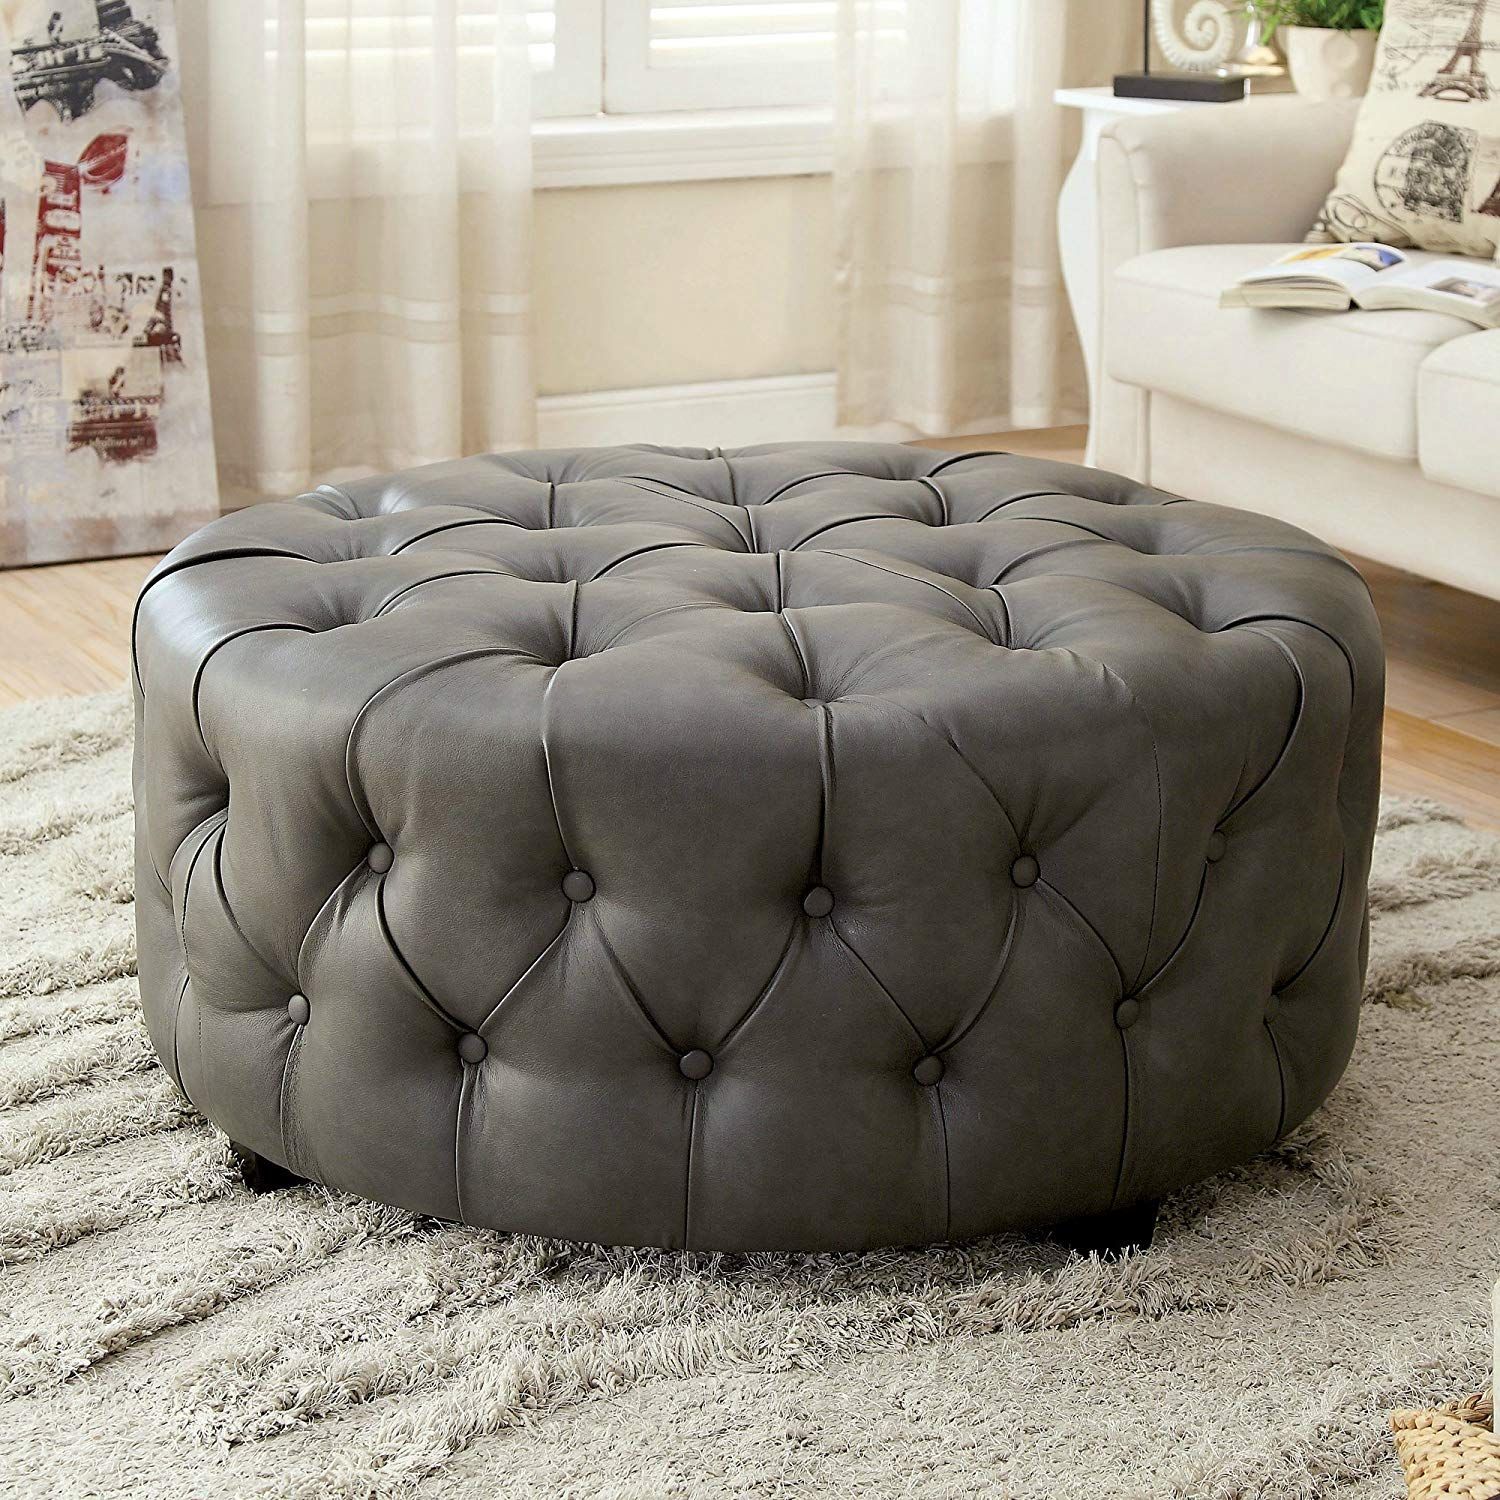 Tufted Round Leather Ottoman Large Grey Cocktail Modern | Round Leather For Silver And White Leather Round Ottomans (View 4 of 20)